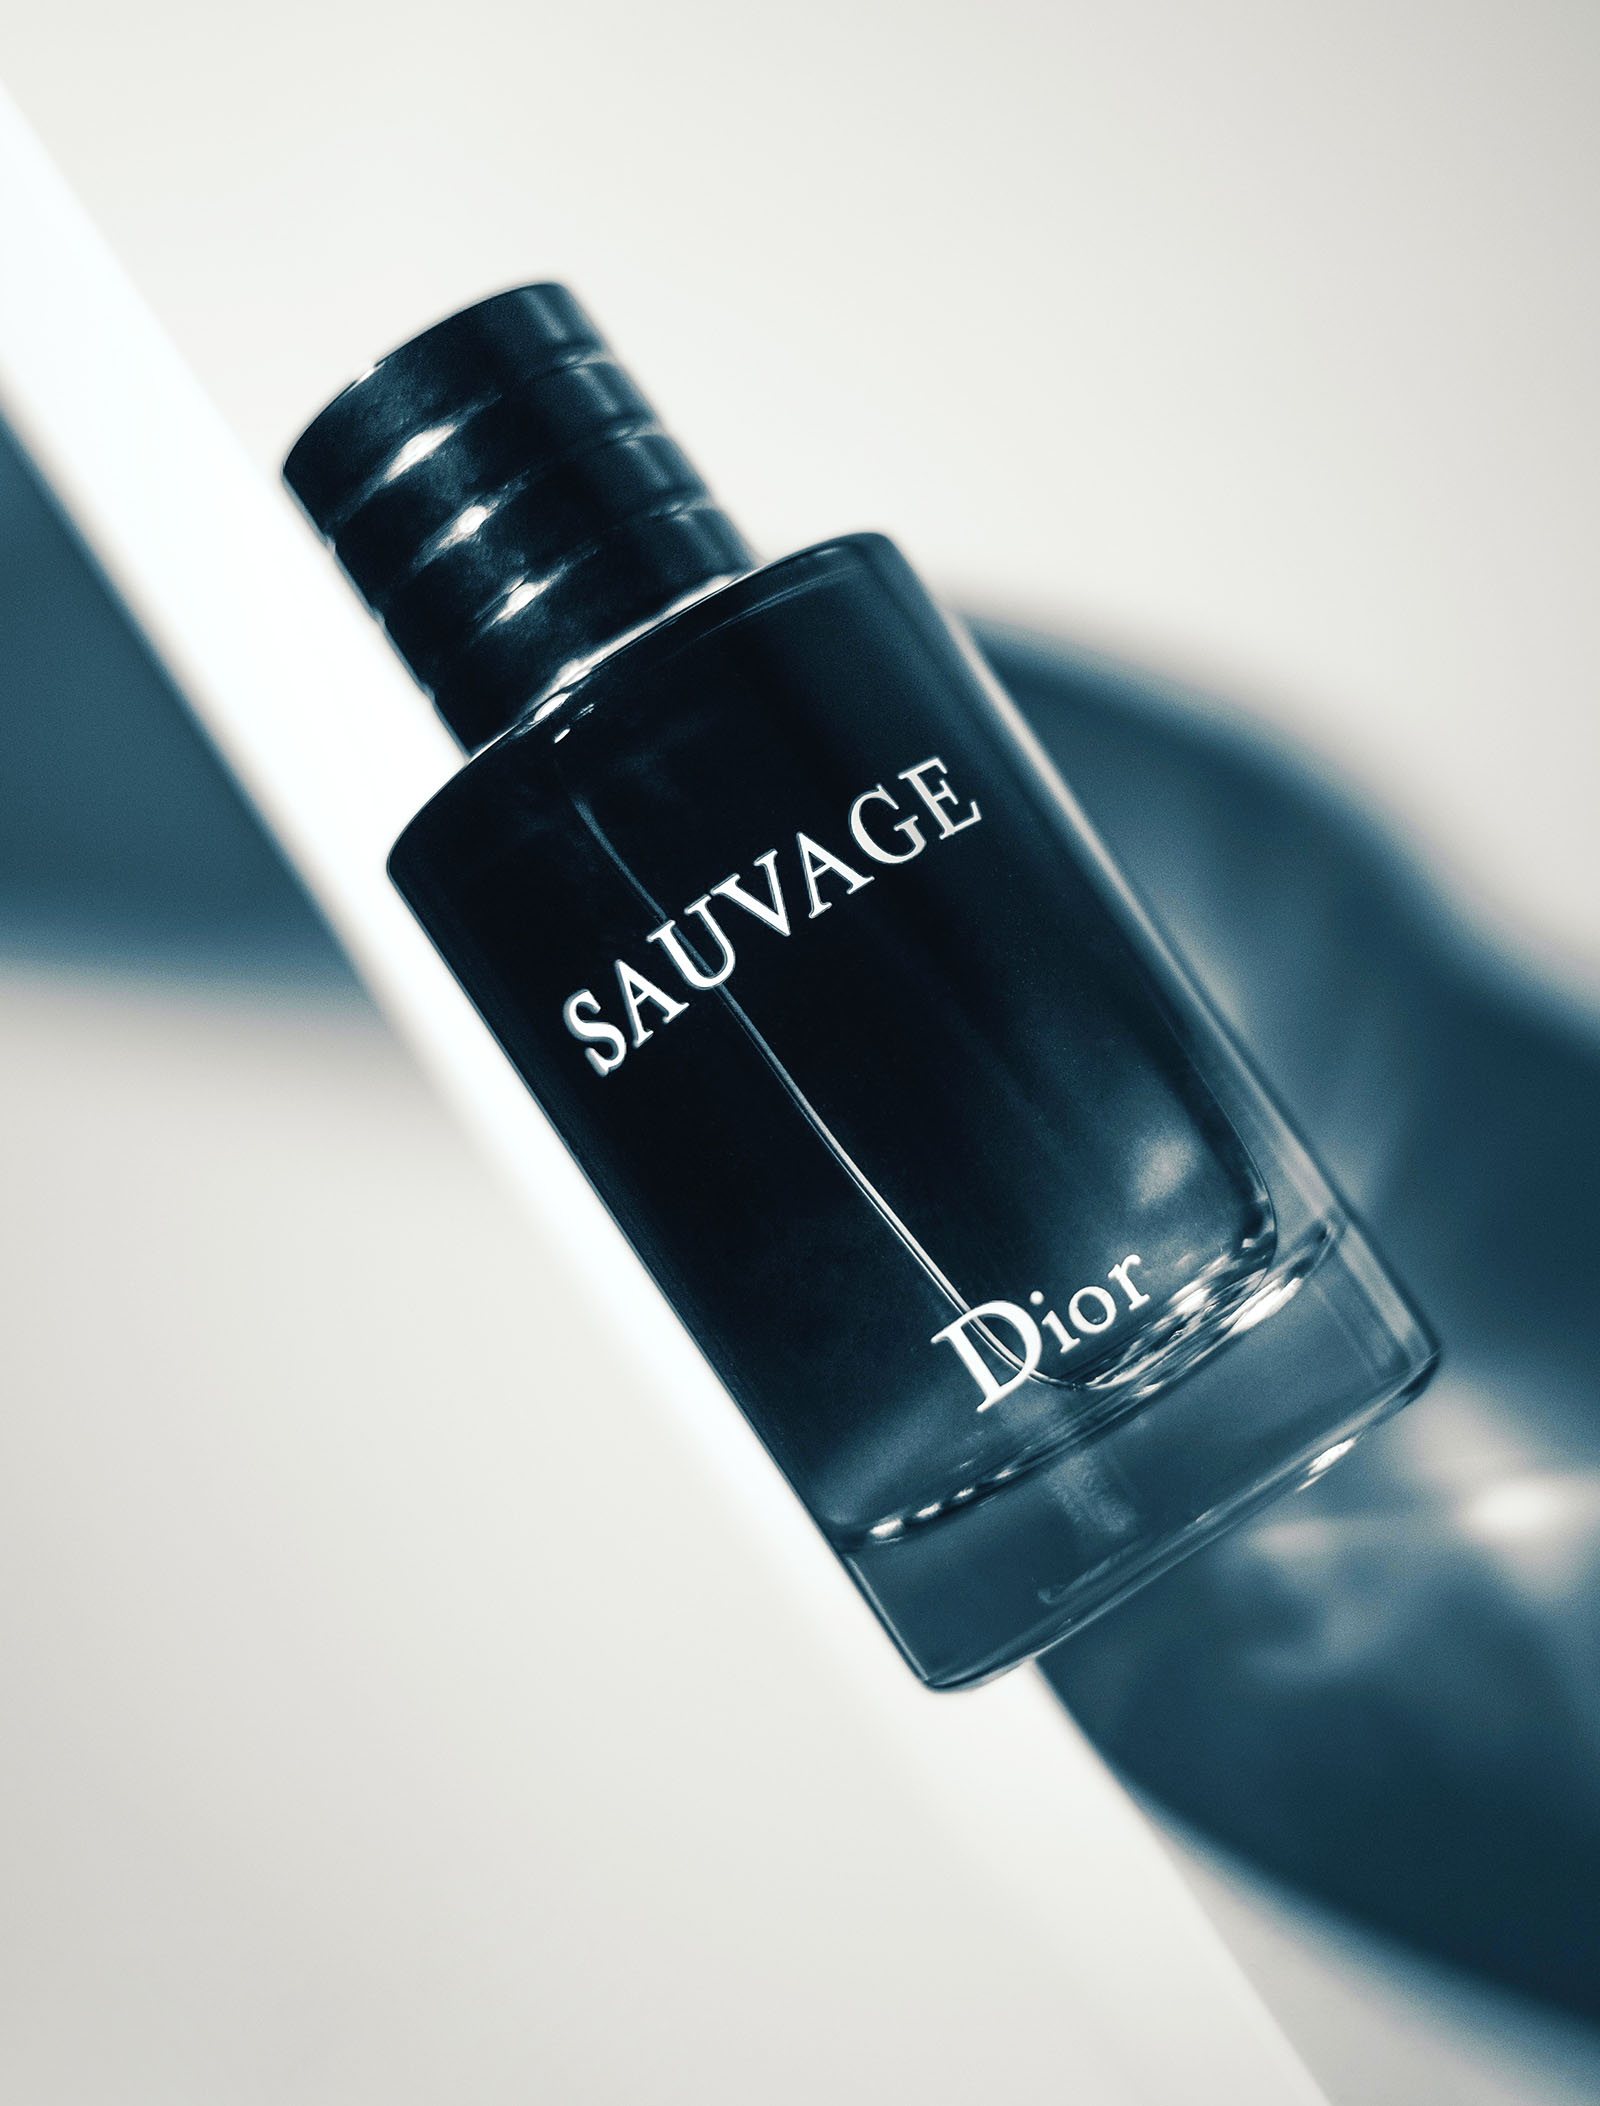 Dior Sauvage is one of the best men's fragrances